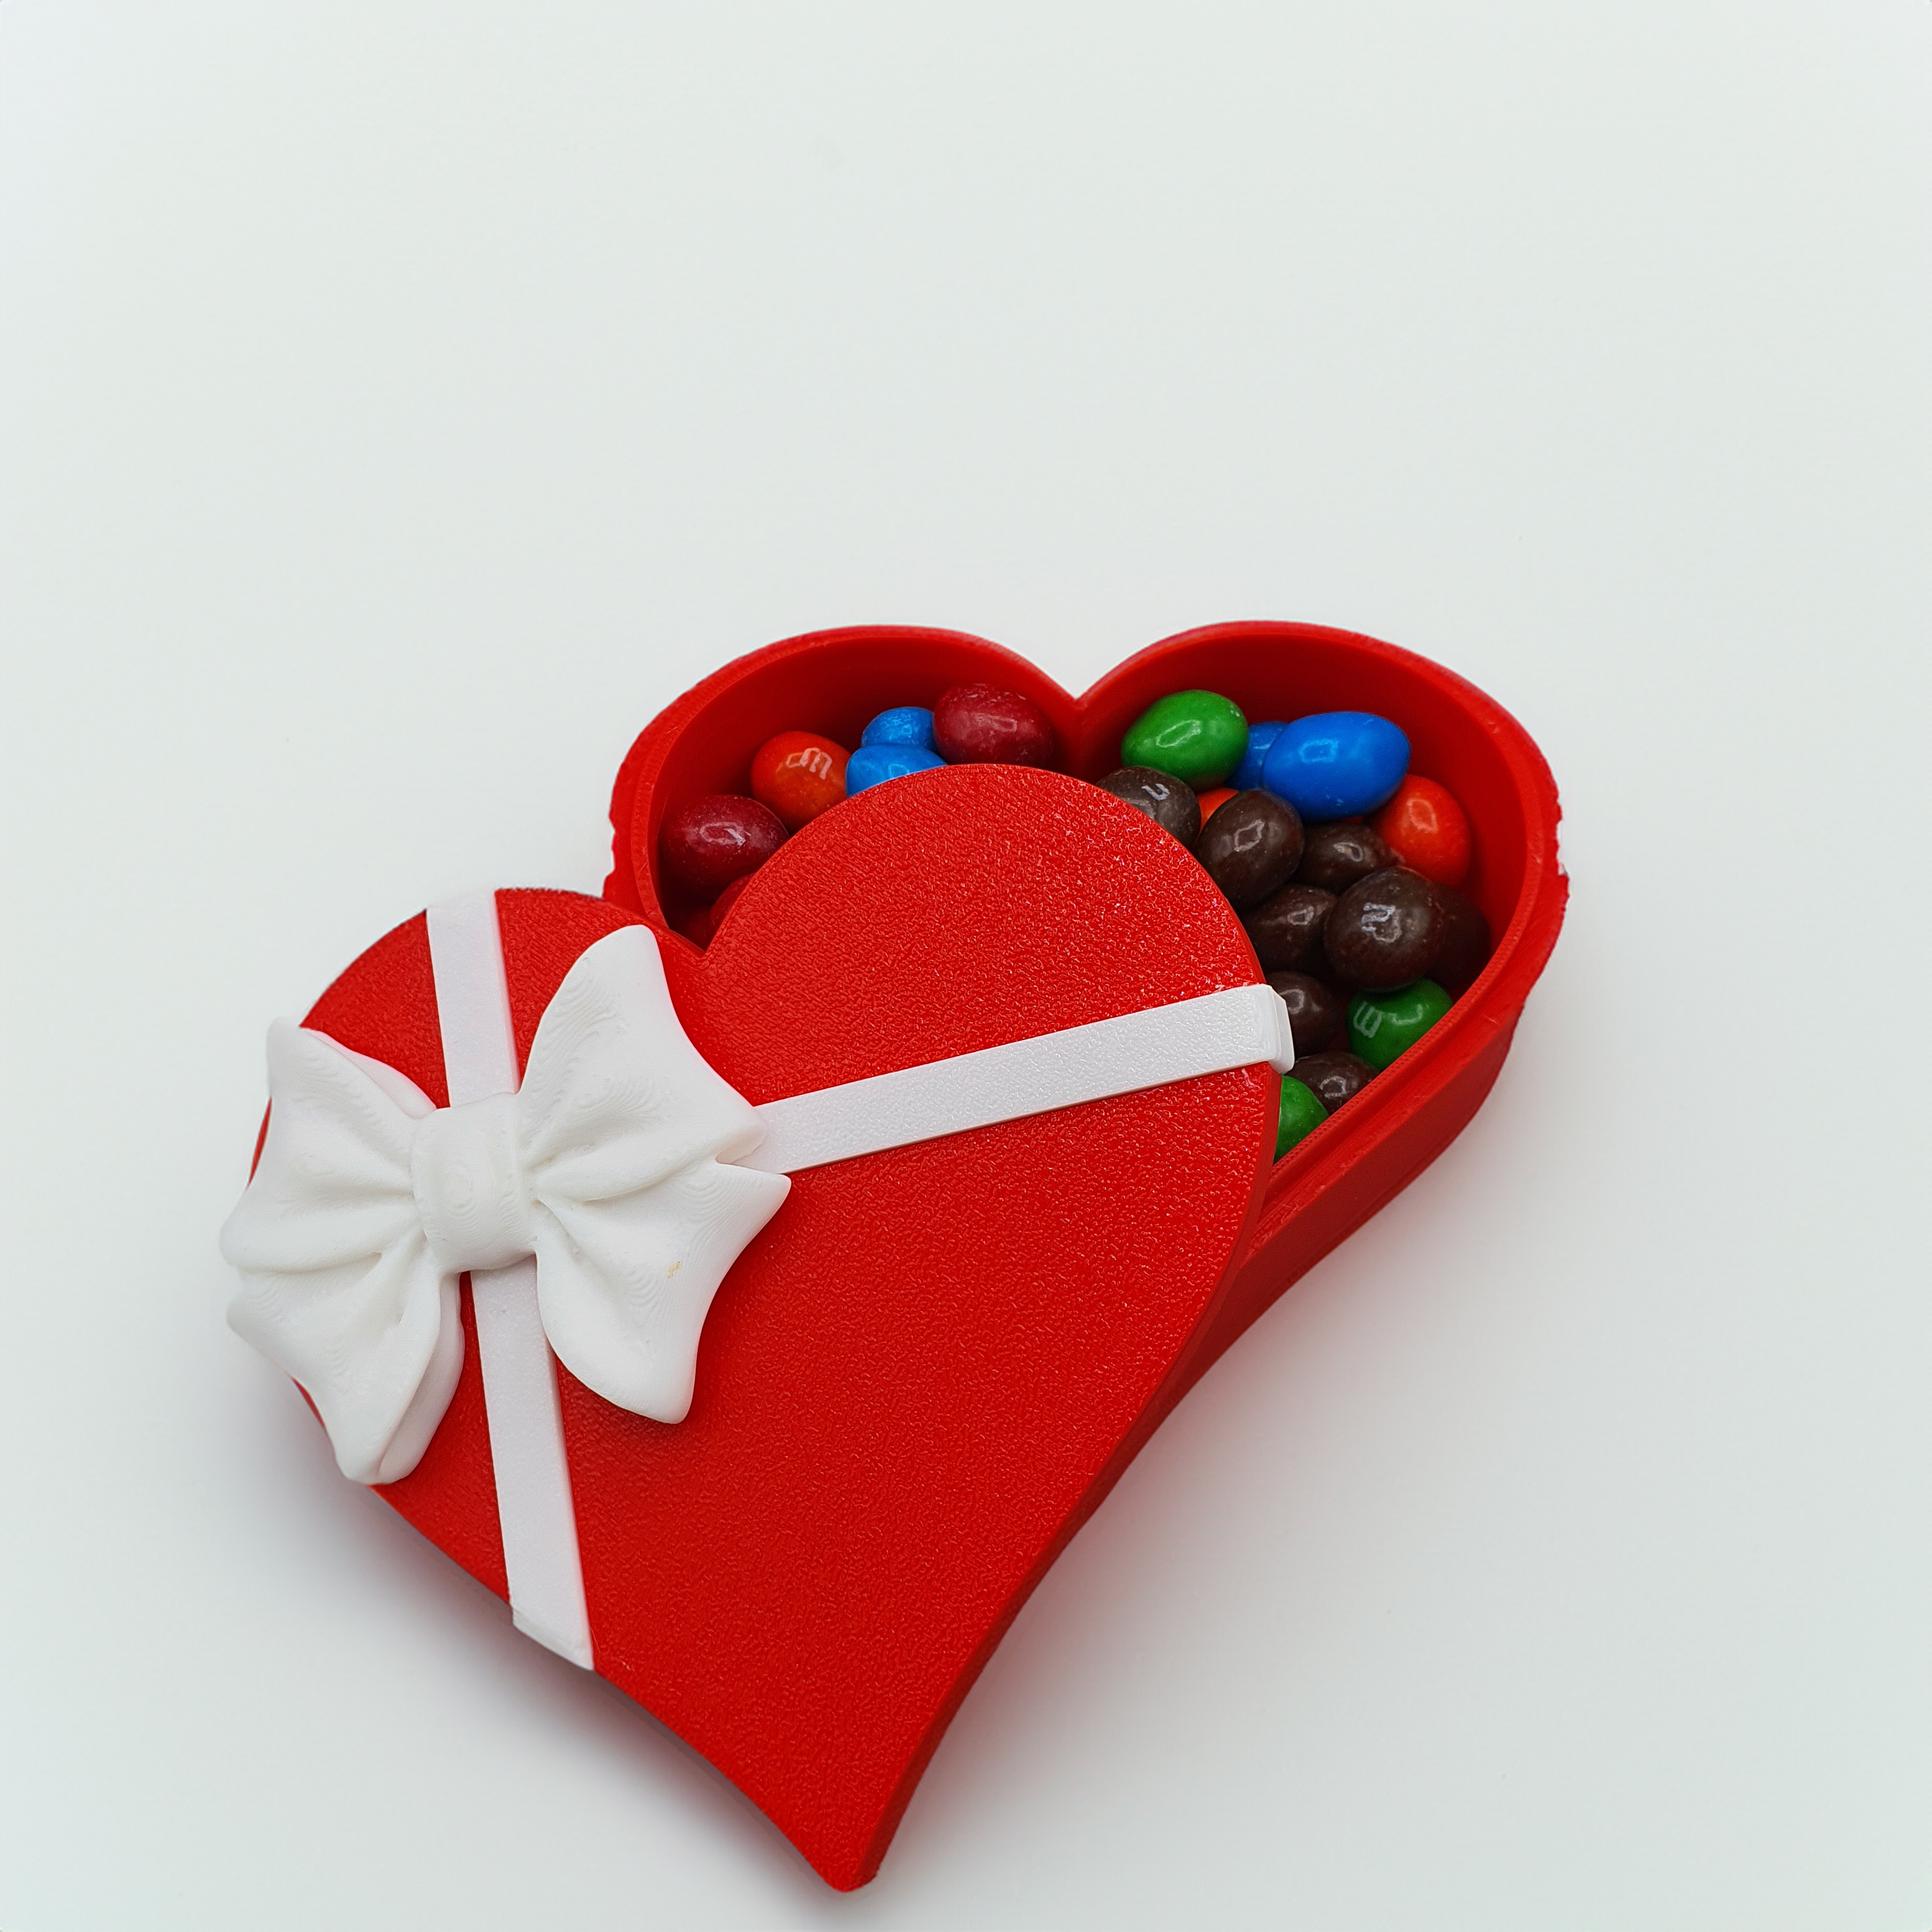 VALENTINES HEART GIFT BOX STORAGE - 3D model by Tactical Kaoz on 